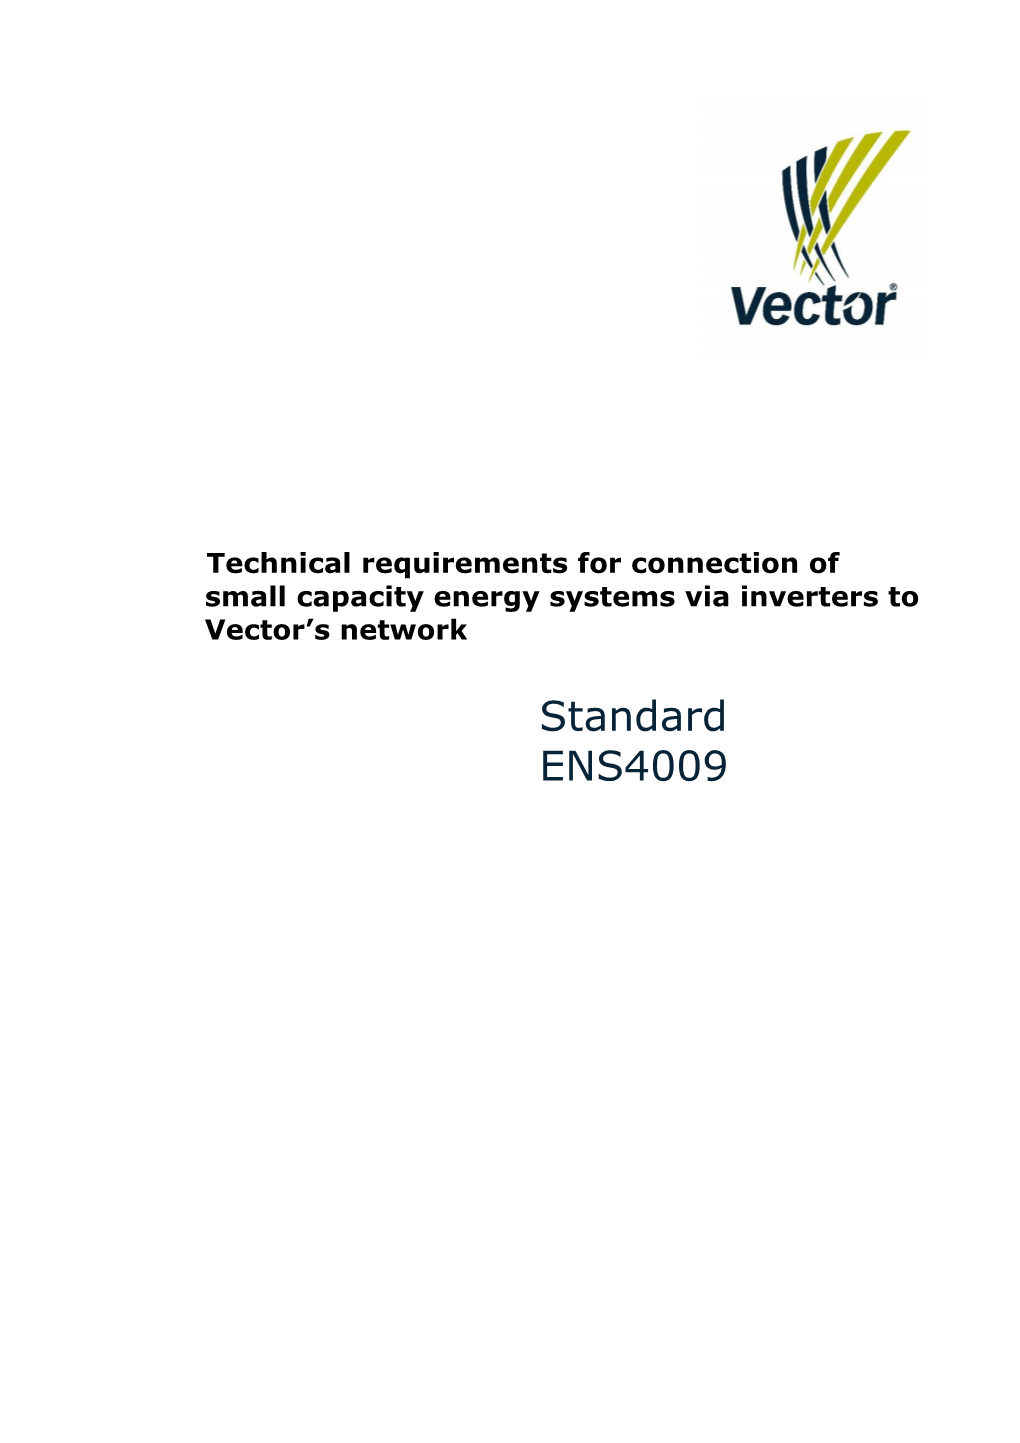 Technical Requirements for Connection of Small Capacity Energy Systems Via Inverters To